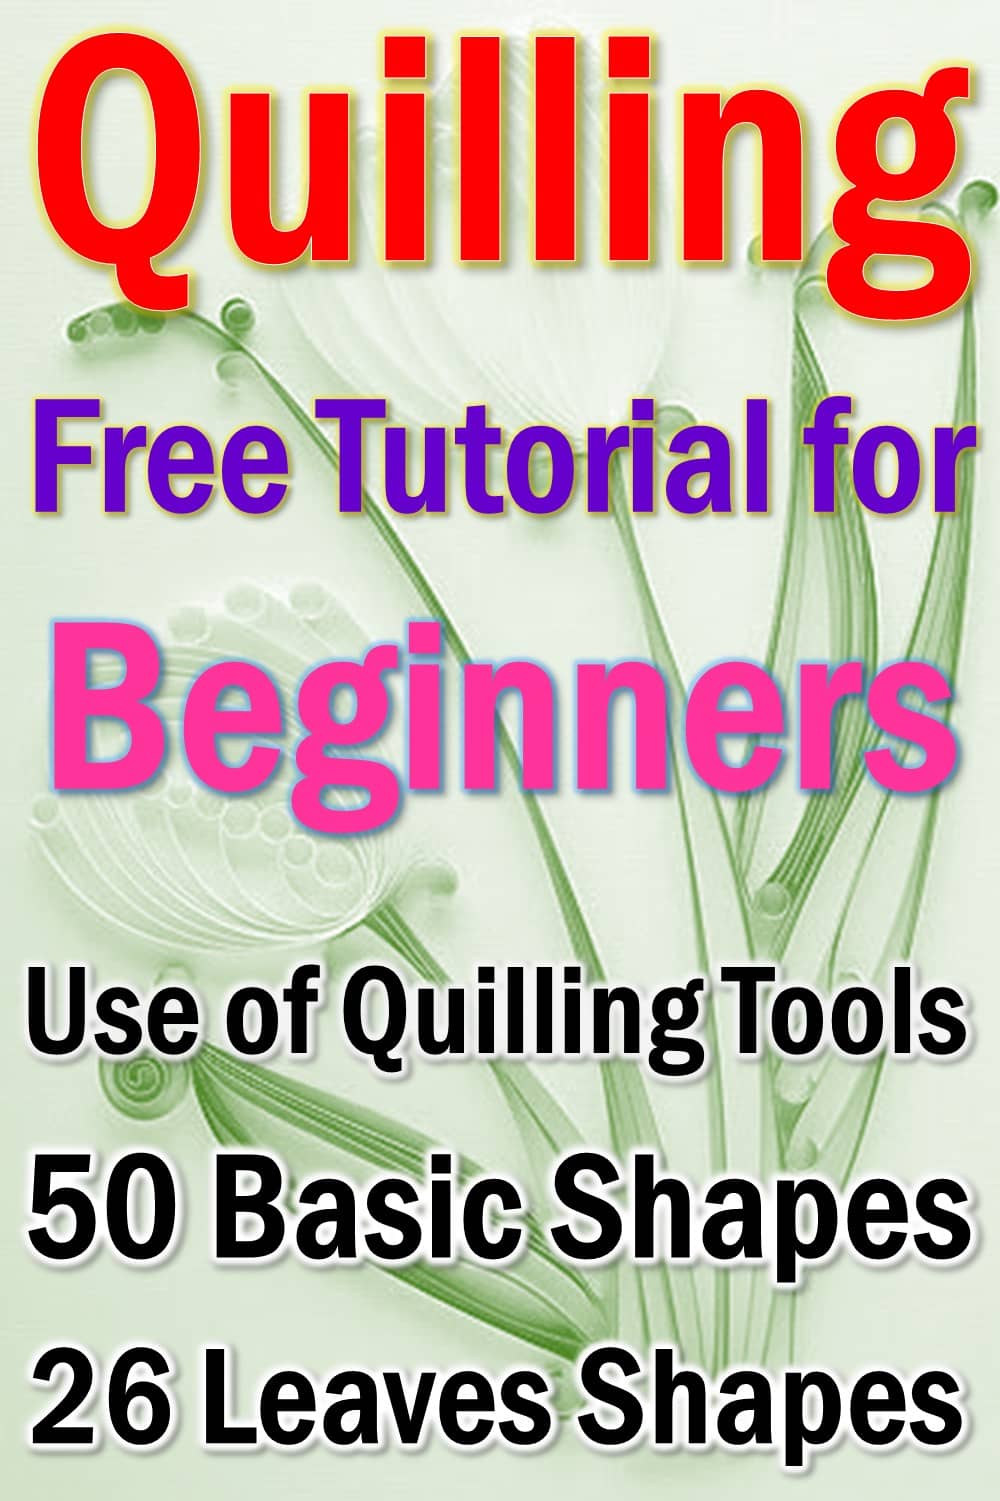 quilling-tutorial-for-beginners-shilpidea